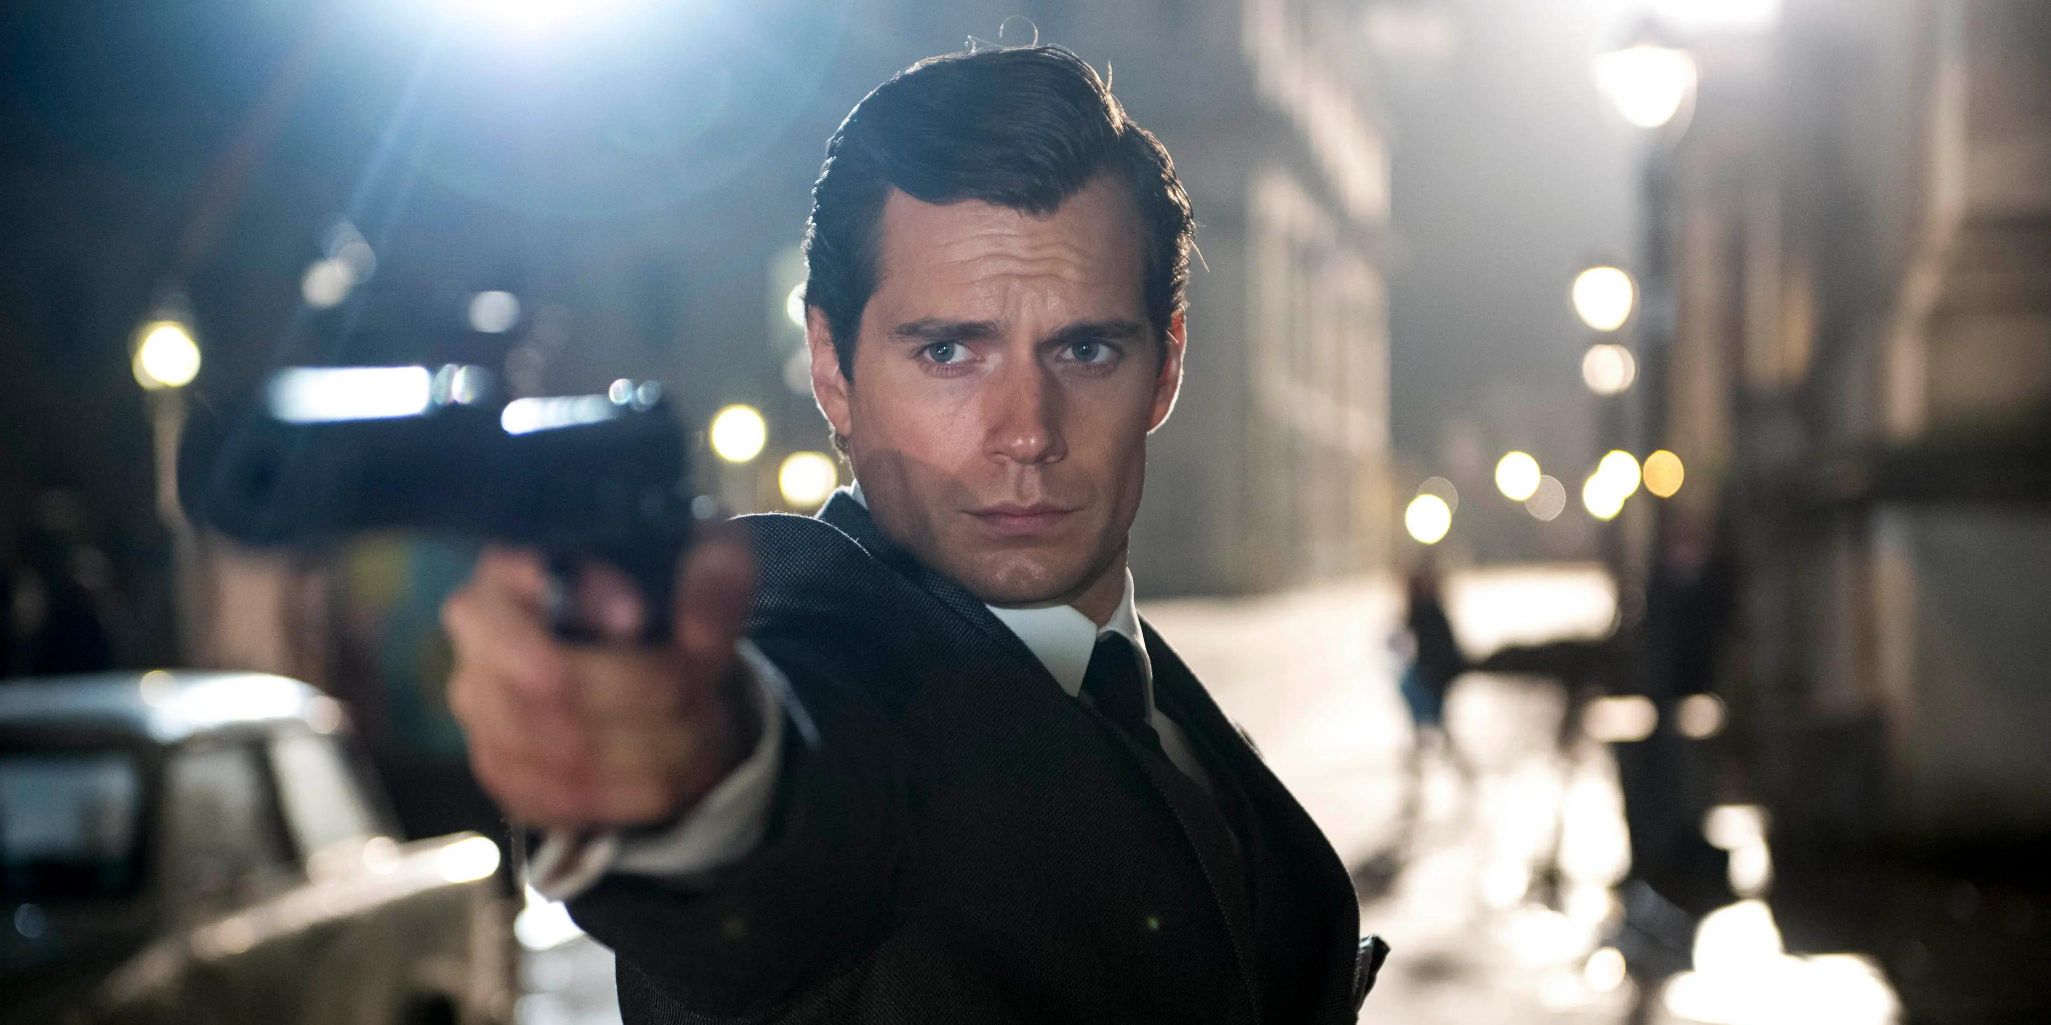 henry cavill wife,henry cavill net worth,henry cavill upcoming movies 2023,henry cavill upcoming movies list,henry cavill upcoming movies and tv shows,henry cavill new movie netflix,henry cavill upcoming superman movies,where is henry cavill filming now,man of steel,henry cavill brothers,ben affleck batman,superman actors,niki richard dalgliesh cavill,charlie cavill,henry cavill the witcher,the witcher tv series,justice league part two,henry cavill mustache,henry cavill sherlock holmes,henry cavill instagram,henry cavill news,superman actors in order,henry cavill moustache,henry cavill sherlock,henry cavill man of steel 2,henry cavill bench press,henry cavill kal,stardust 2007 henry cavill,henry cavill is he married,henry cavill stats,man of steel 2 full movie,henry cavill superman contract,henry cavill deadlift,henry cavill website,meeting henry cavill,ben affleck out as batman,is henry cavill in shazam,henry cavill mobile number,henry cavill fort lauderdale house,henry cavill movies 2019,henry cavill upcoming movies 2019,henry cavill man from uncle workout,henry cavill full workout witcher,how was henry cavill discovered,is ben affleck still playing batman,henry cavill instagram superman,is henry cavill still playing superman reddit,henry cavill upcoming movies,henry cavill movies 2021,henry cavill upcoming movies 2022,henry cavill upcoming movies 2024,henry cavill upcoming movies captain marvel,does henry cavill have any upcoming movies,henry cavill new upcoming movies